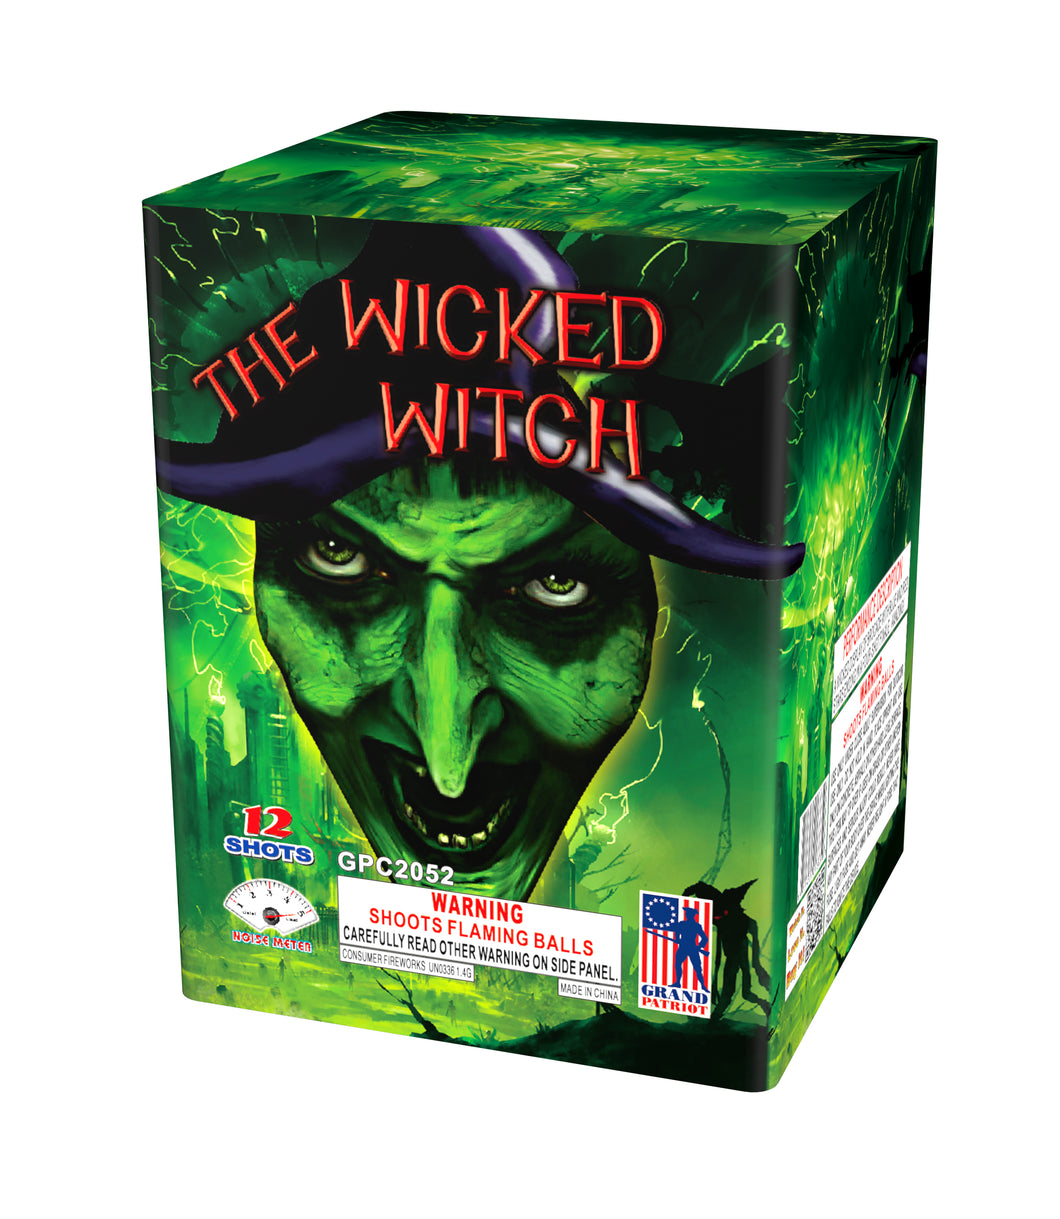 The Wicked Witch - 12 shot